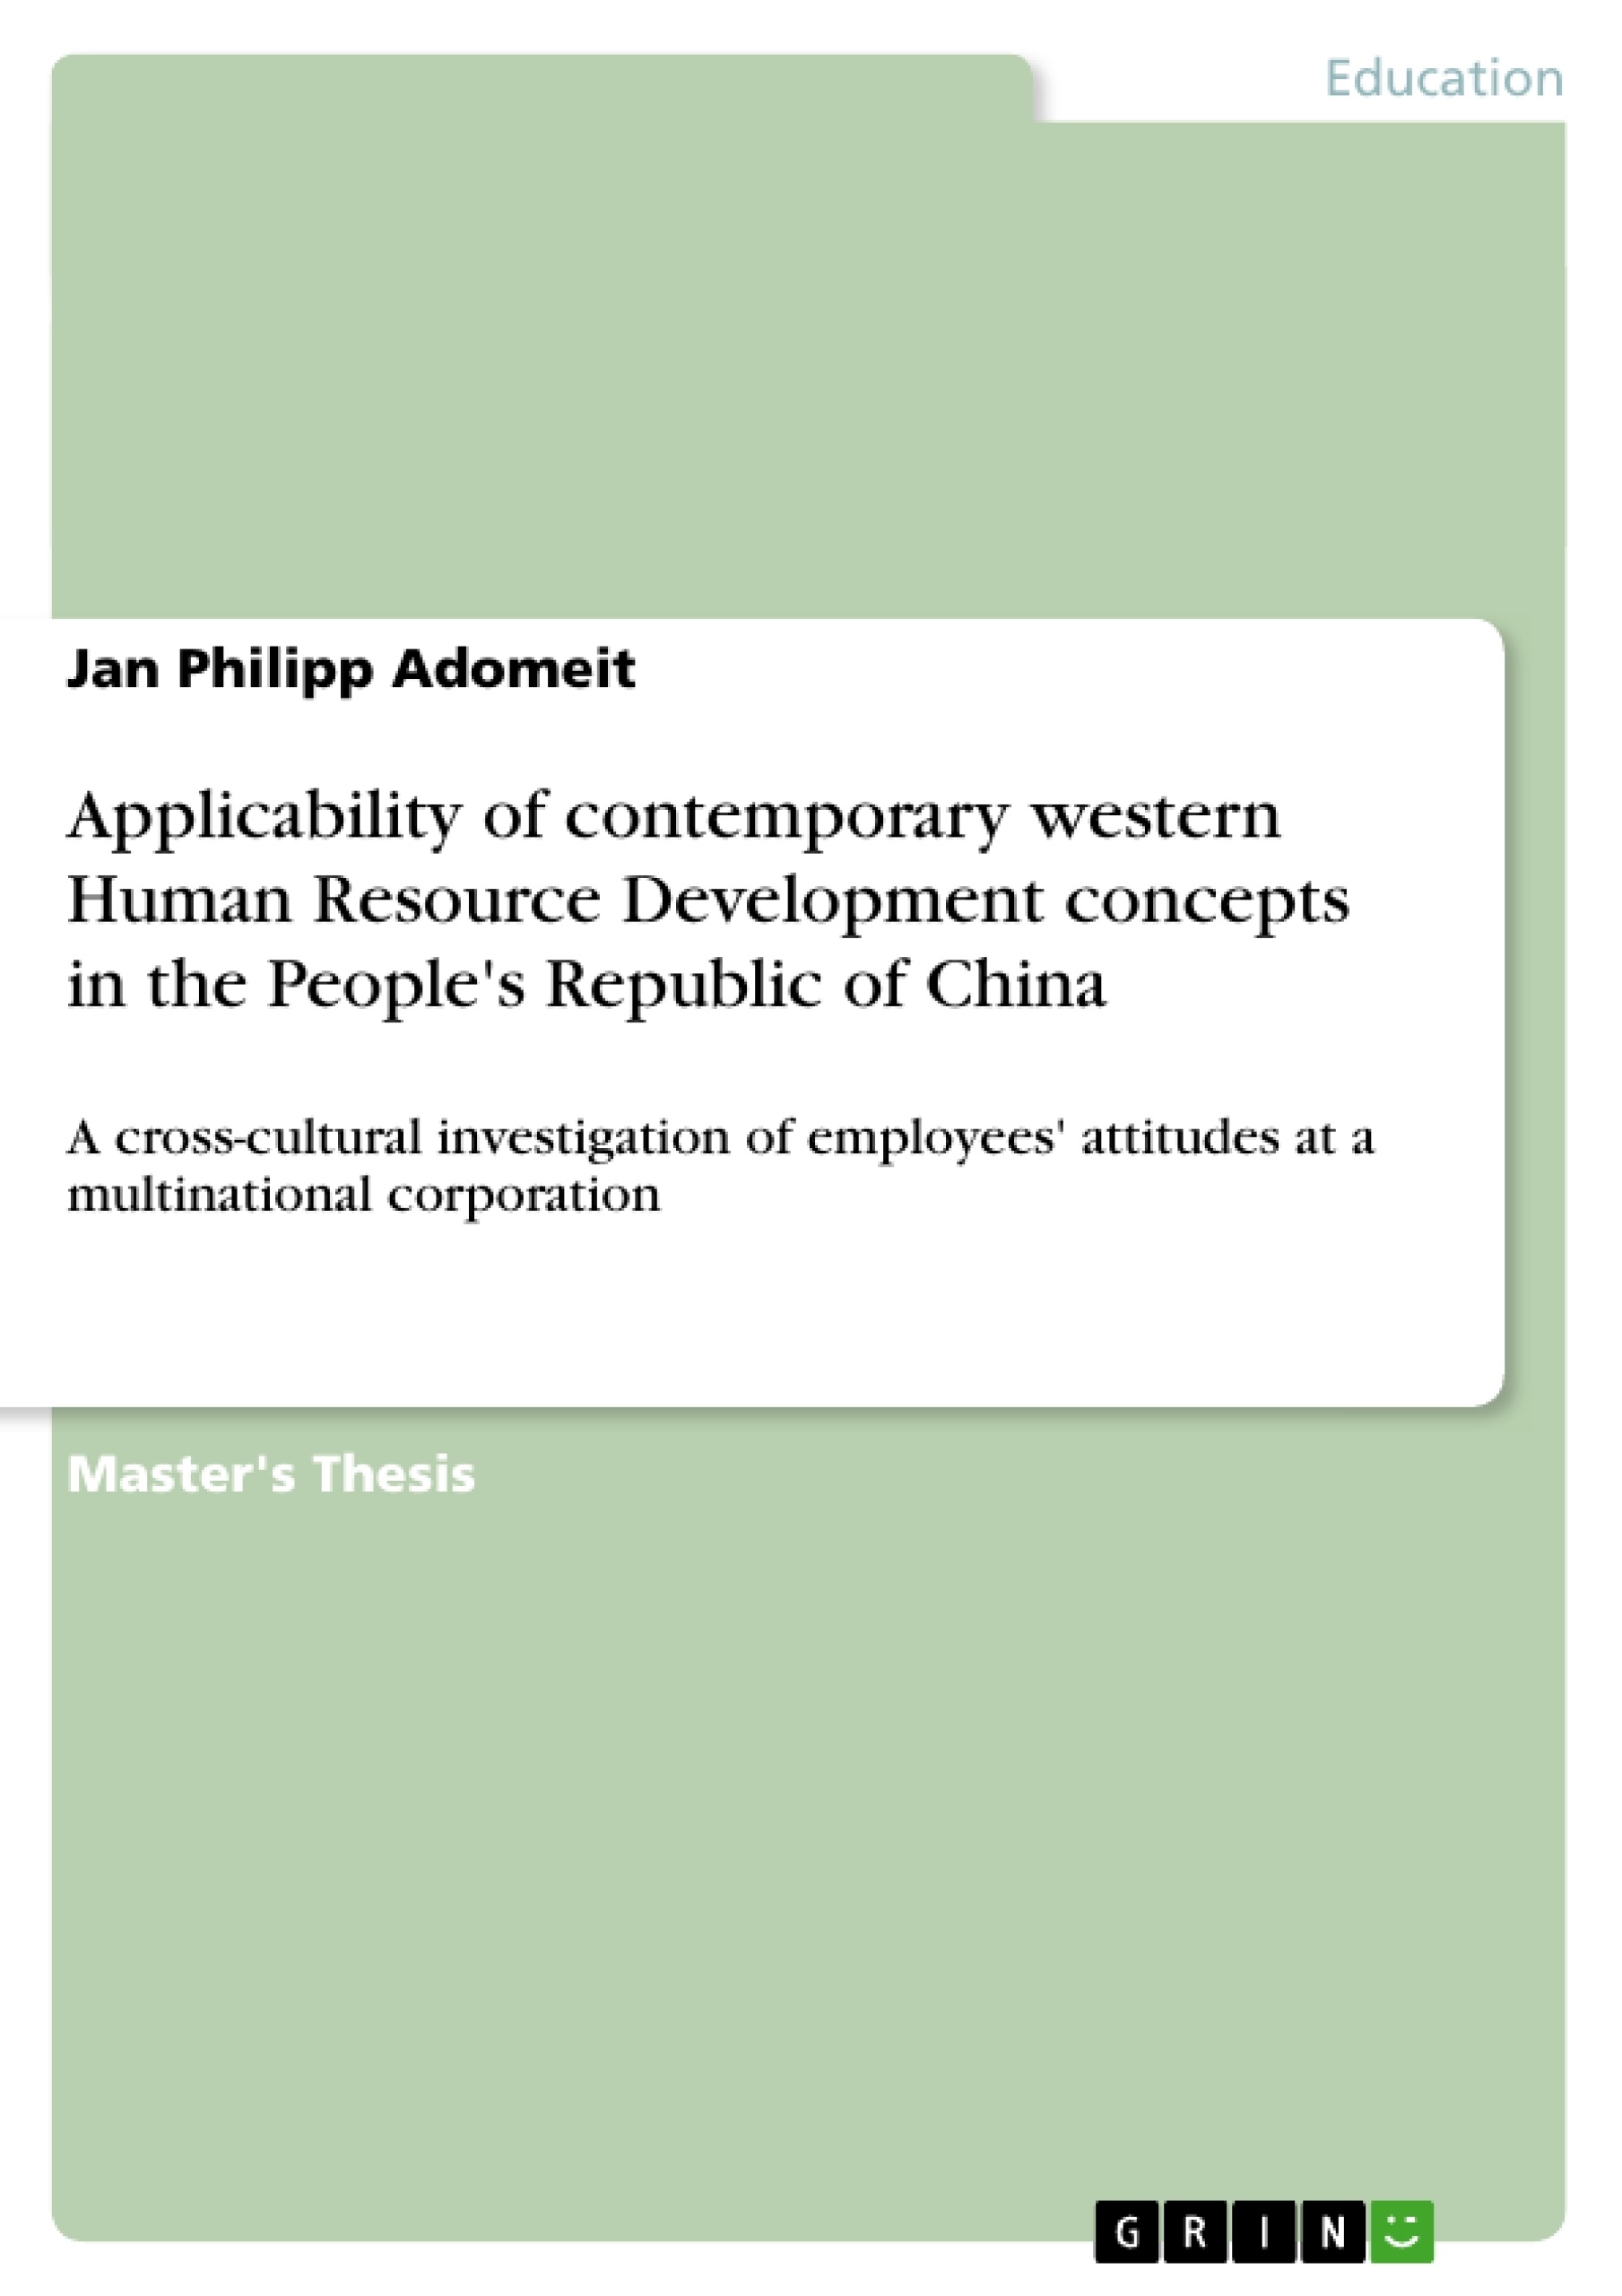 Title: Applicability of contemporary western Human Resource Development concepts in the People's Republic of China